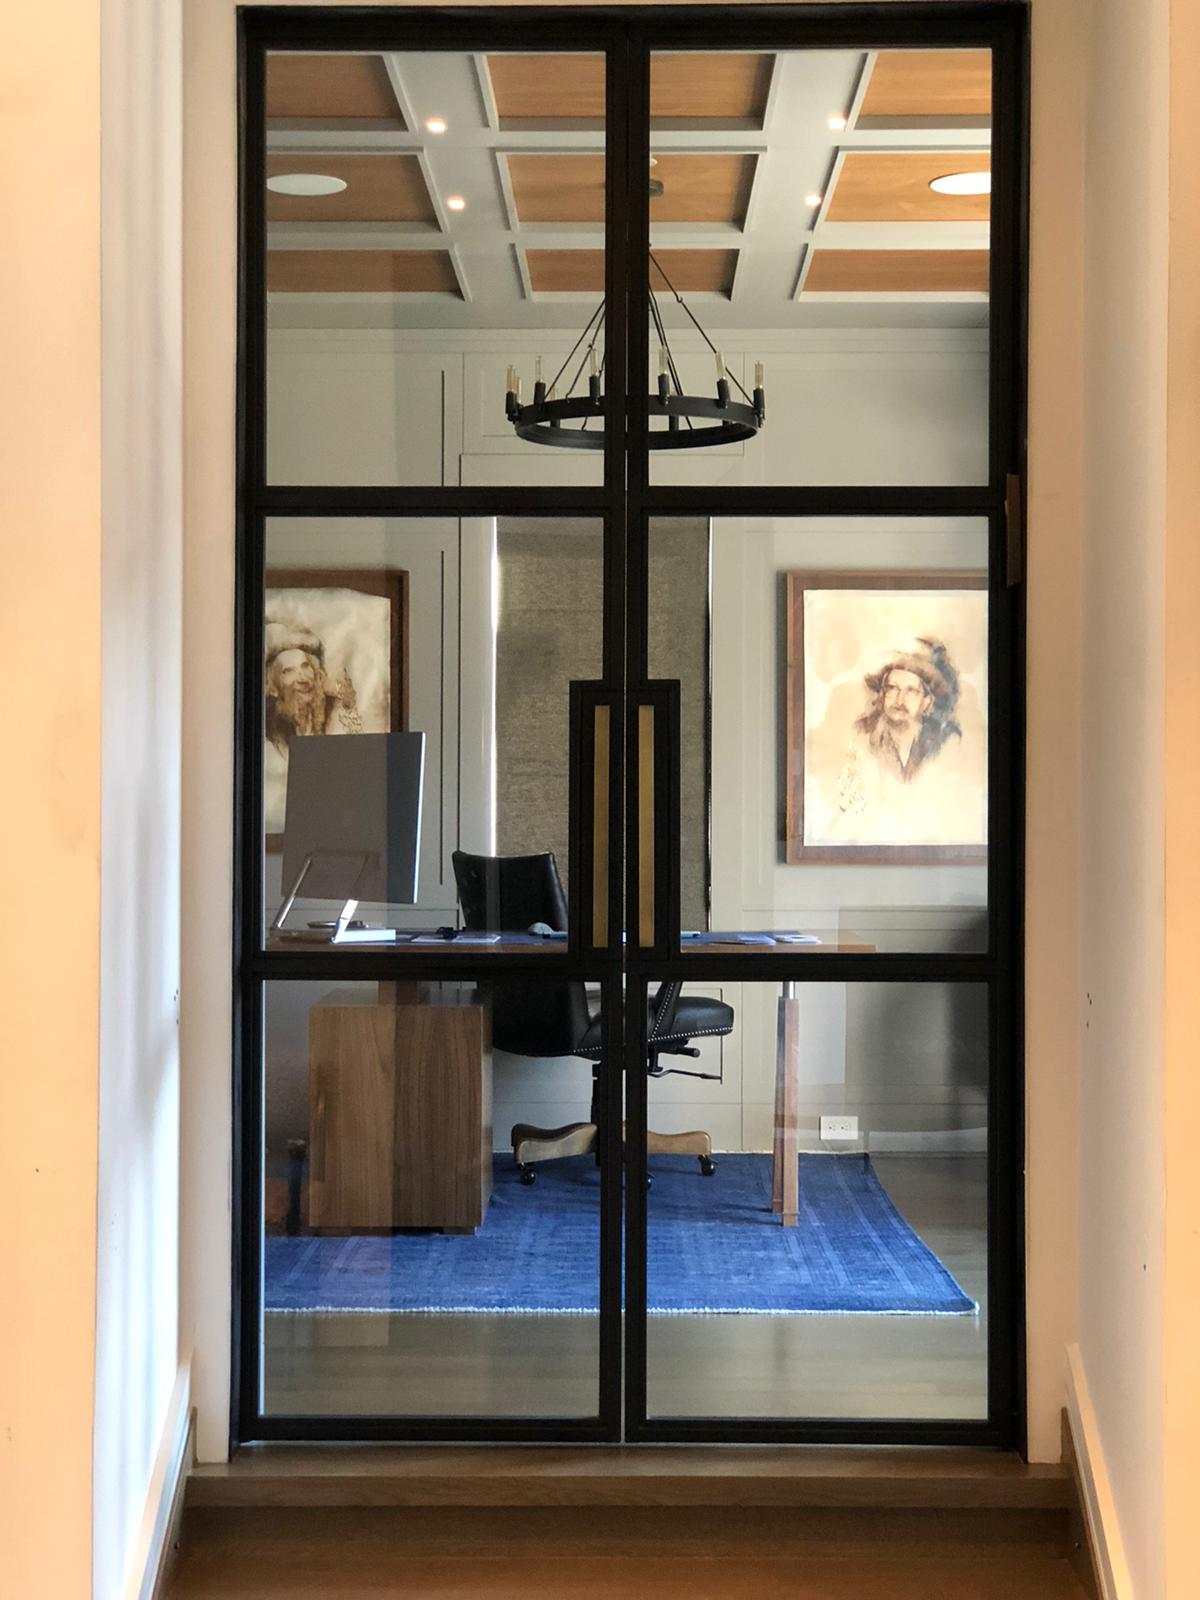 HMH Architectural Metal and Glass - Metal framed french doors